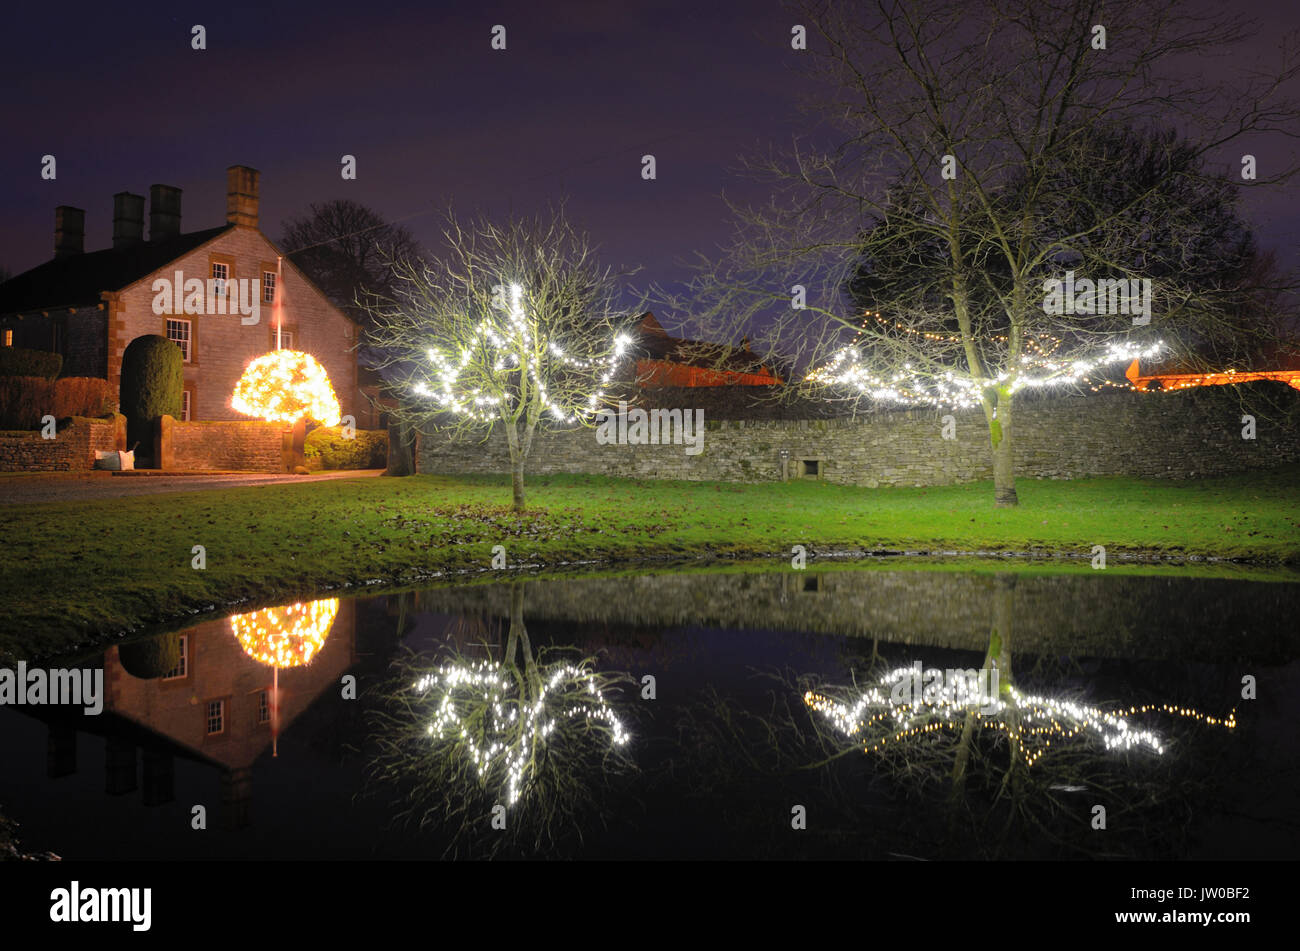 Christmas lights adorn trees around the village pond in Foolow, a scenic village in the Peak District,Derbyshire,England UK - December Stock Photo